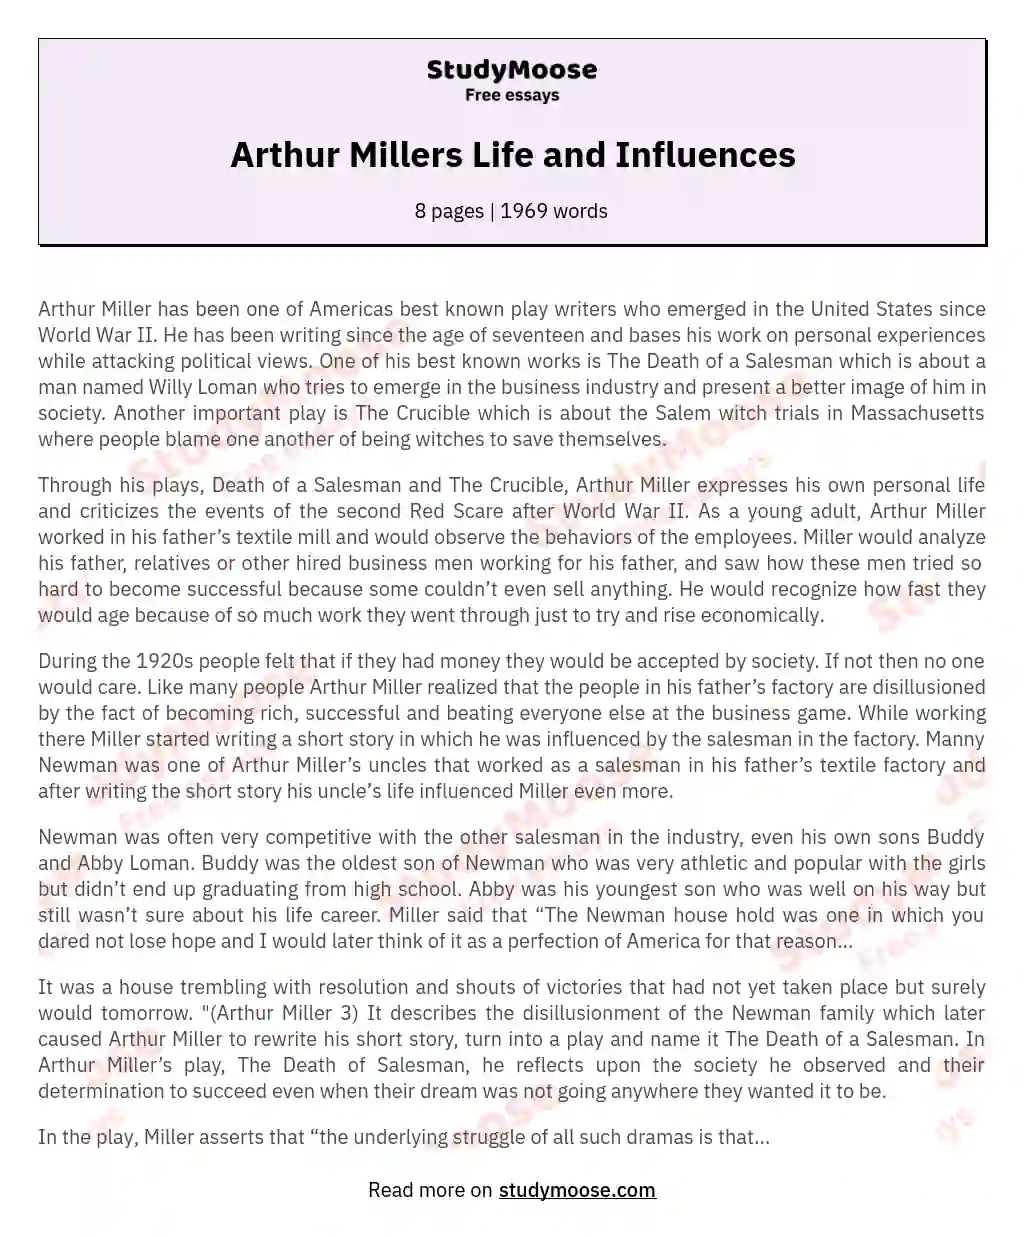 Arthur Millers Life and Influences